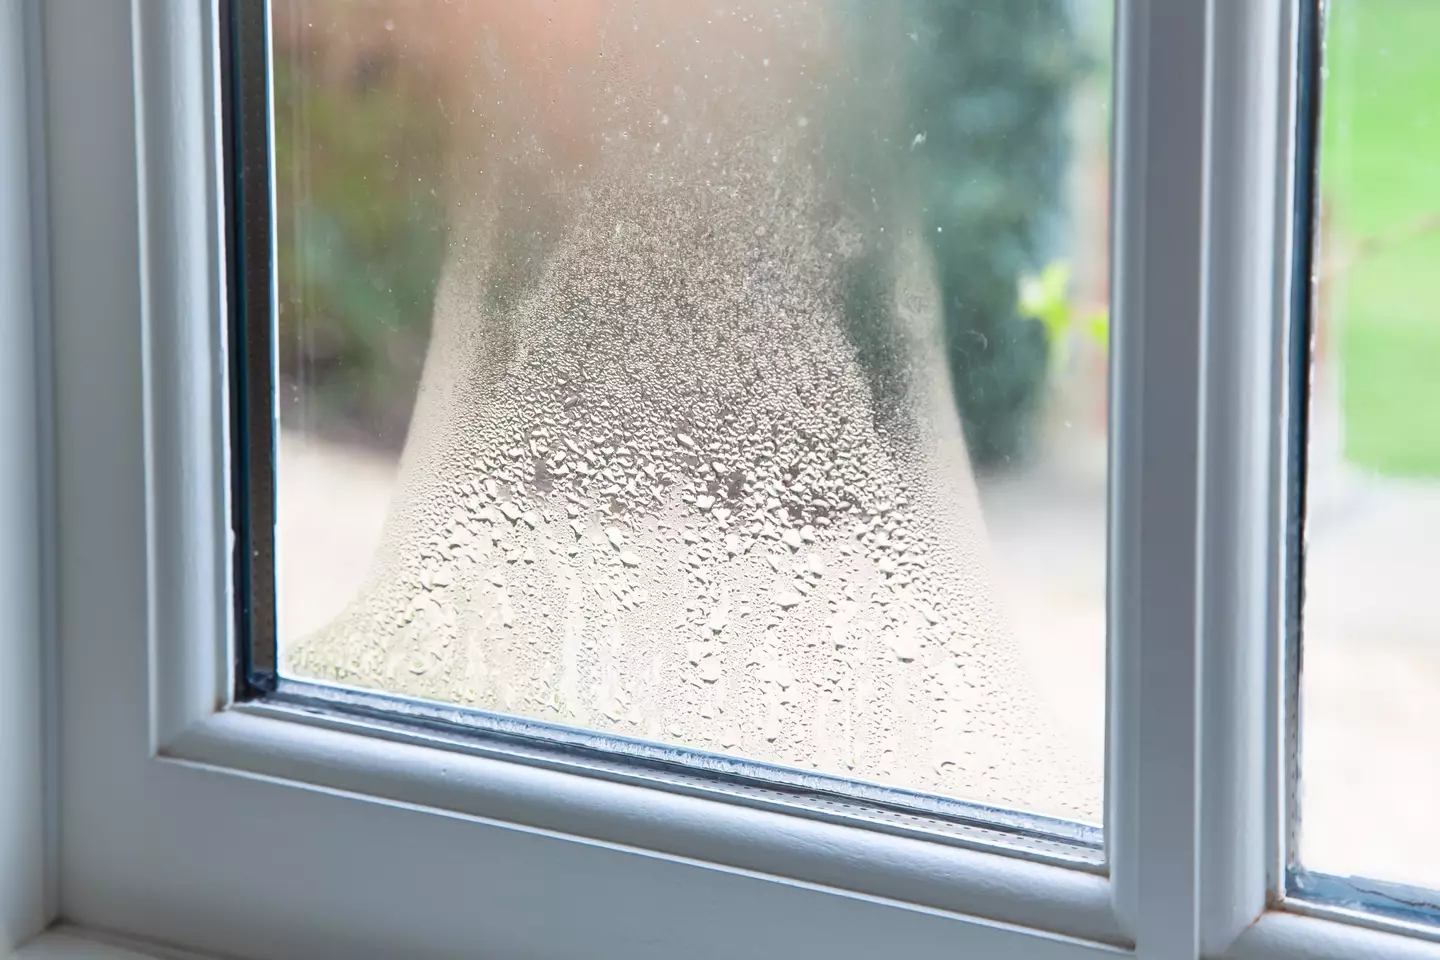 Brits are plagued by condensation on their windows in the colder months.